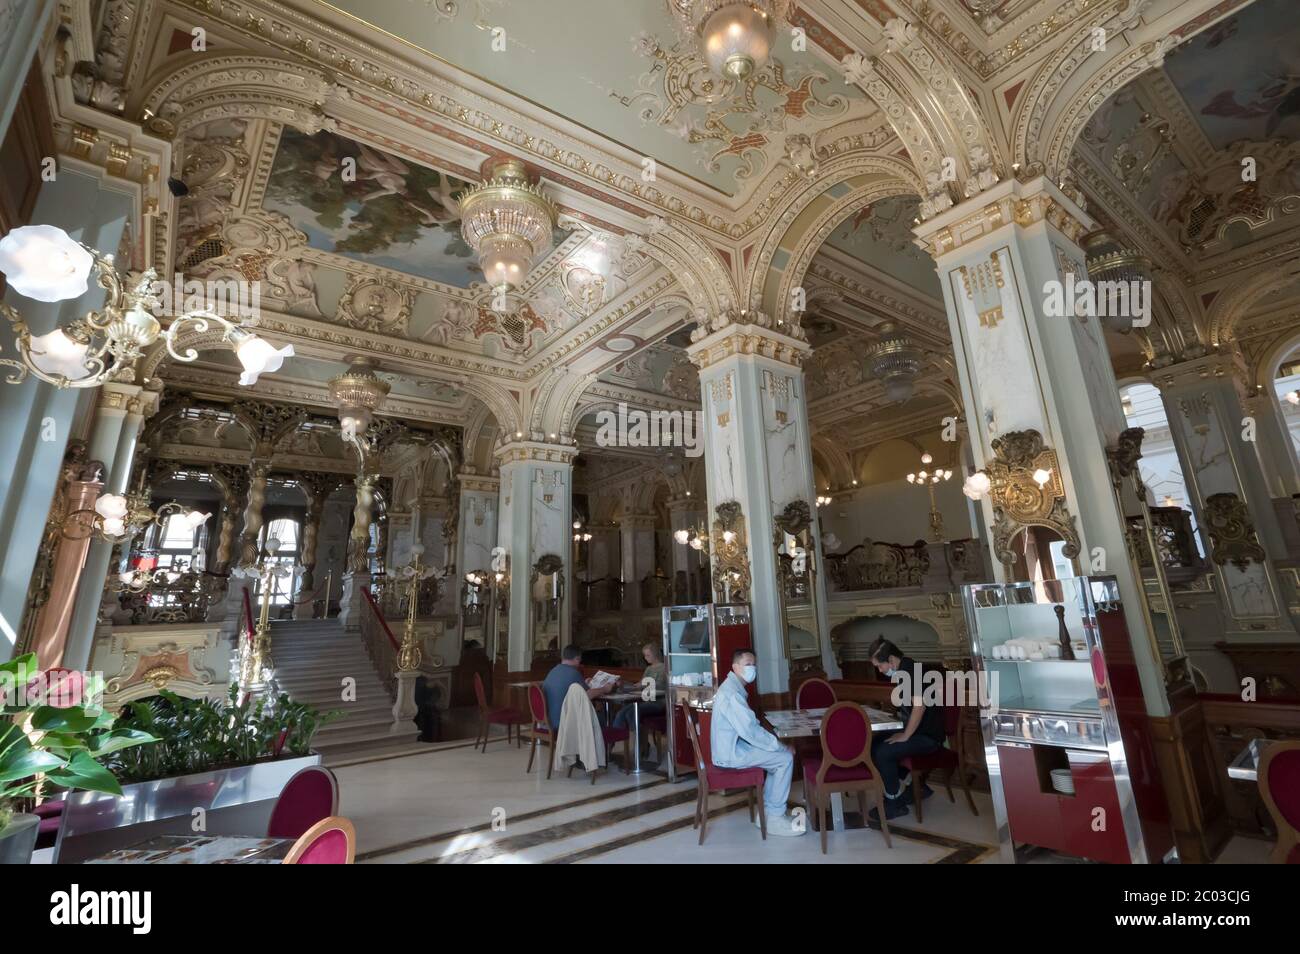 (200611) -- BUDAPEST, June 11, 2020 (Xinhua) -- Customers are seen at the reopened New York Cafe in Budapest, Hungary, June 10, 2020. Customers are allowed to enter the inside of cafe bars as the novel coronavirus pandemic has subsided and the COVID-19 restrictions were gradually lifted in Hungary. (Photo by Attila Volgyi/Xinhua) Stock Photo